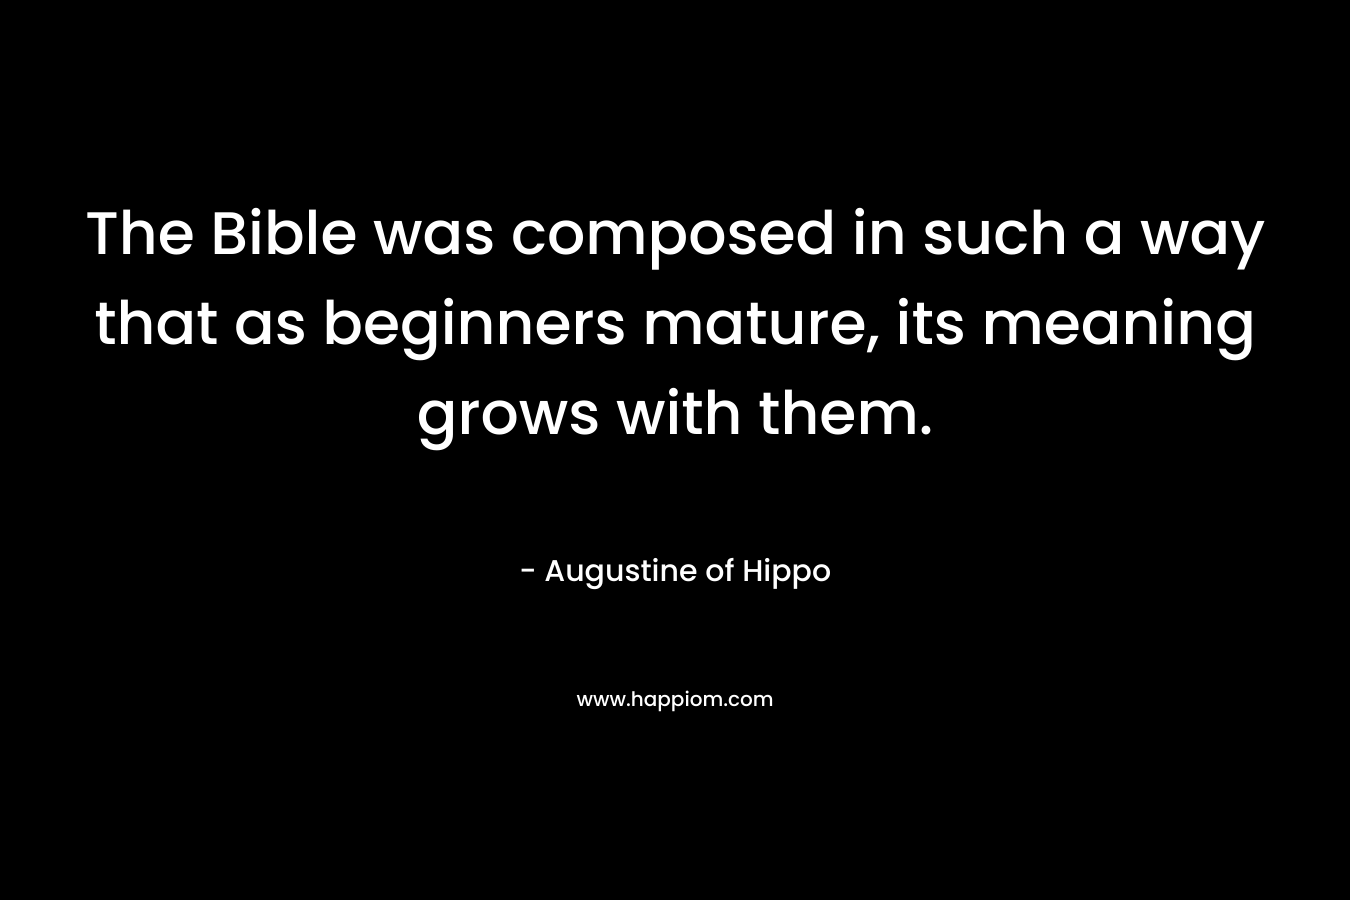 The Bible was composed in such a way that as beginners mature, its meaning grows with them. – Augustine of Hippo